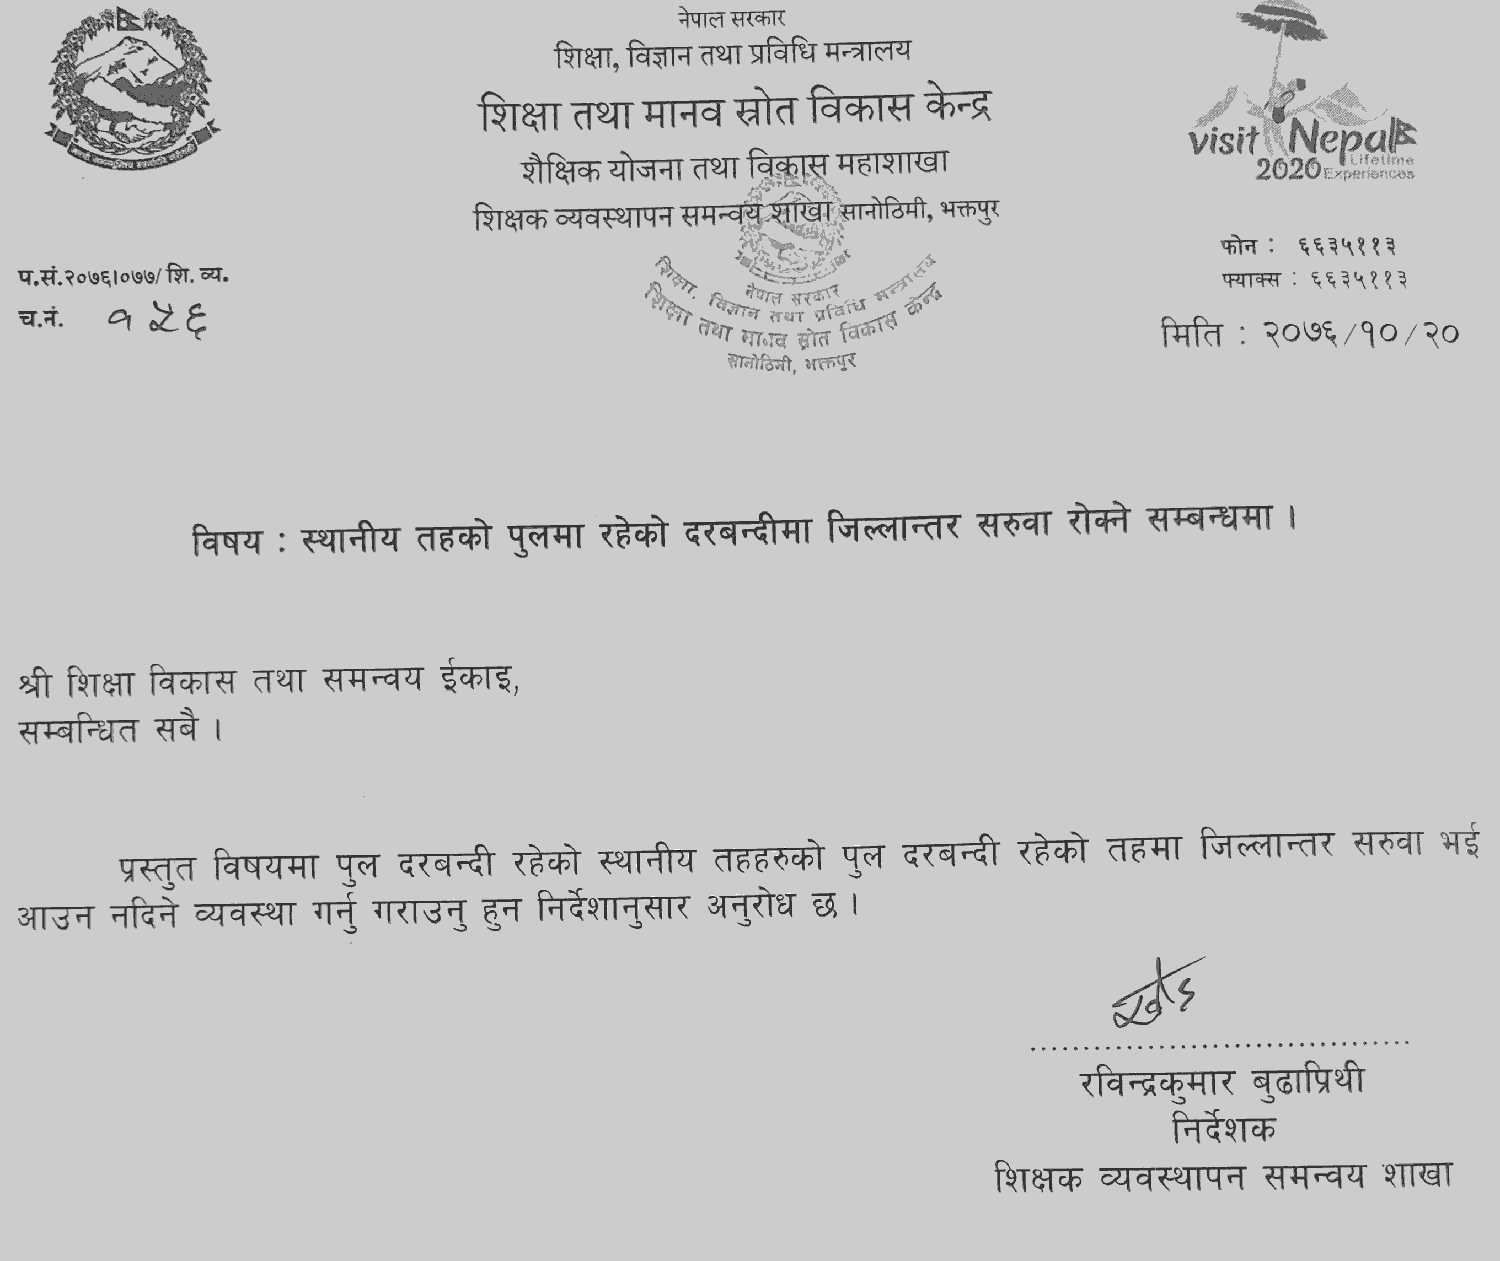 Ministry of Education Notice Dated on 2076 Magh 20-2